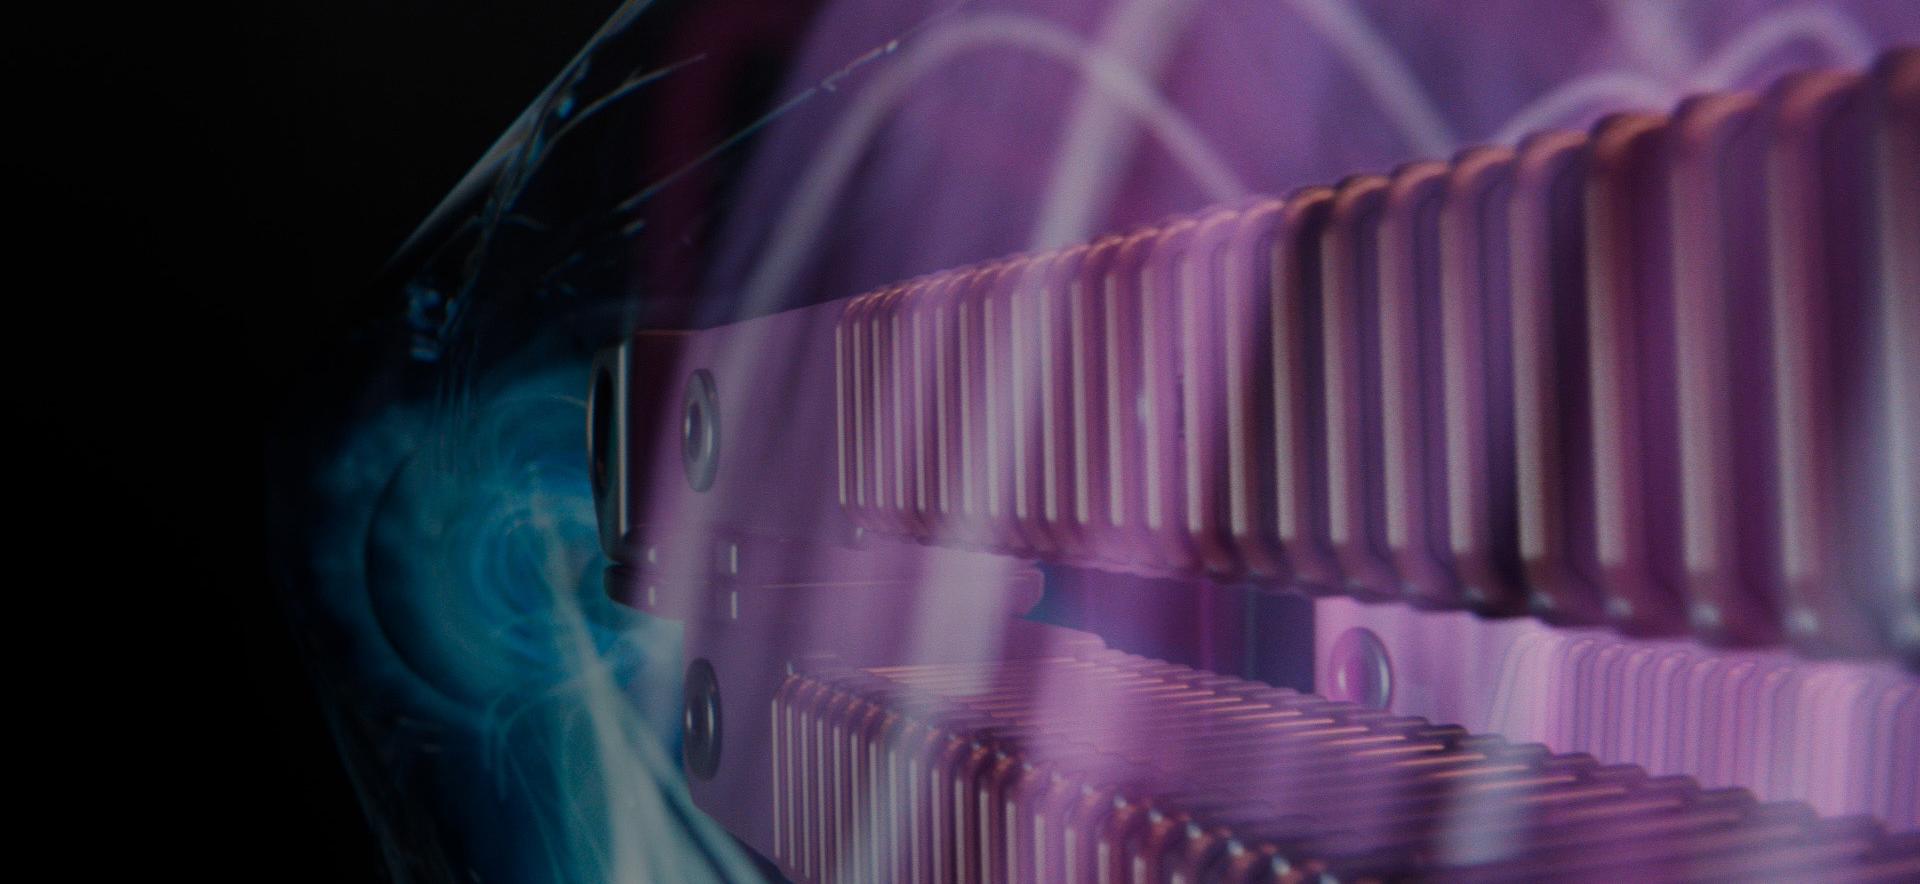 An animation of airflow, visualised in vibrant pink and blue, moves through a cutaway of a machine.